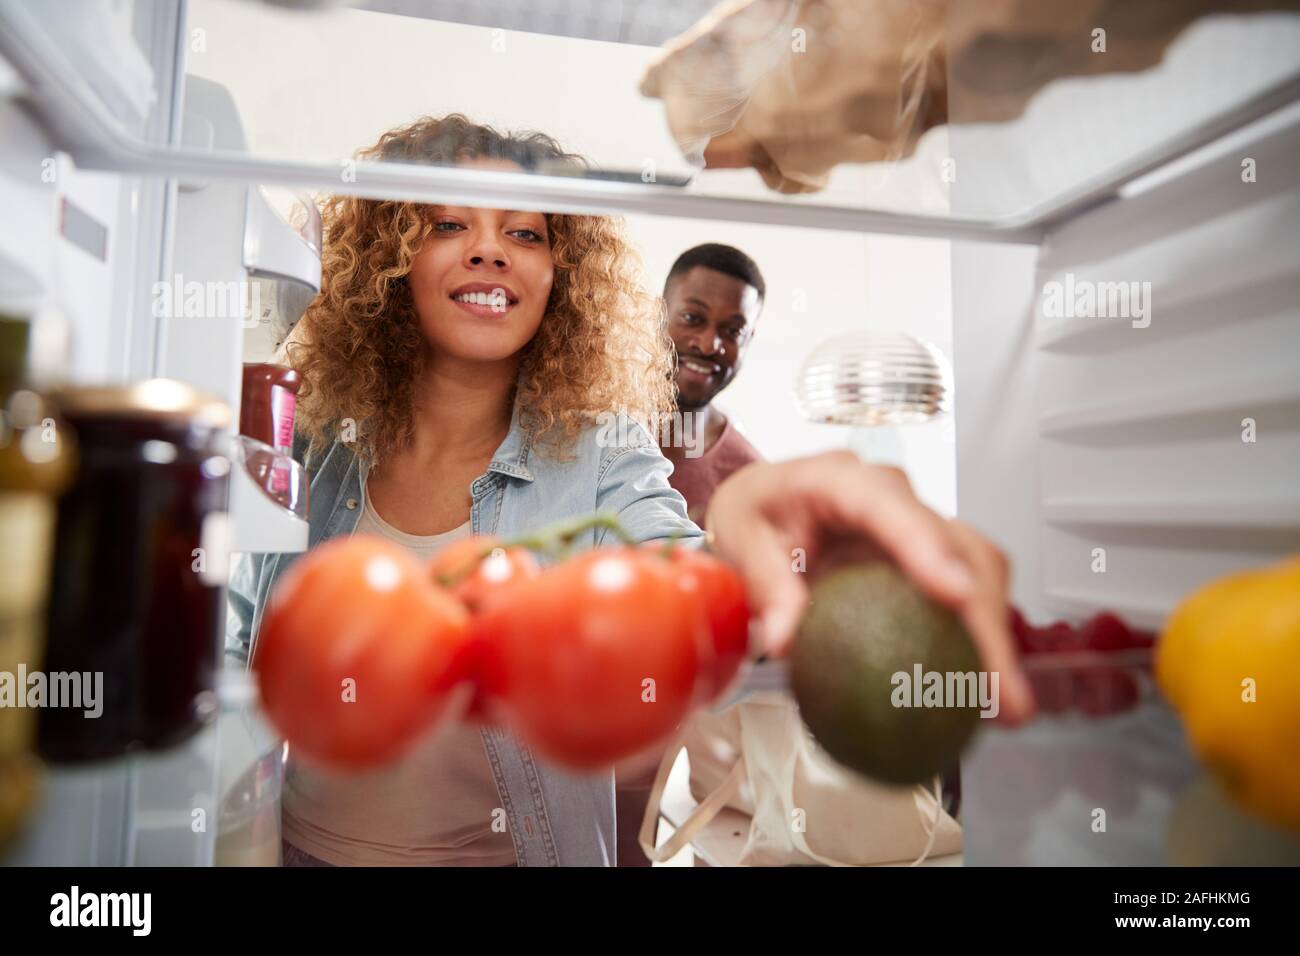 View Looking Out From Inside Of Refrigerator As Couple Open Door And Unpack Shopping Bag Of Food Stock Photo